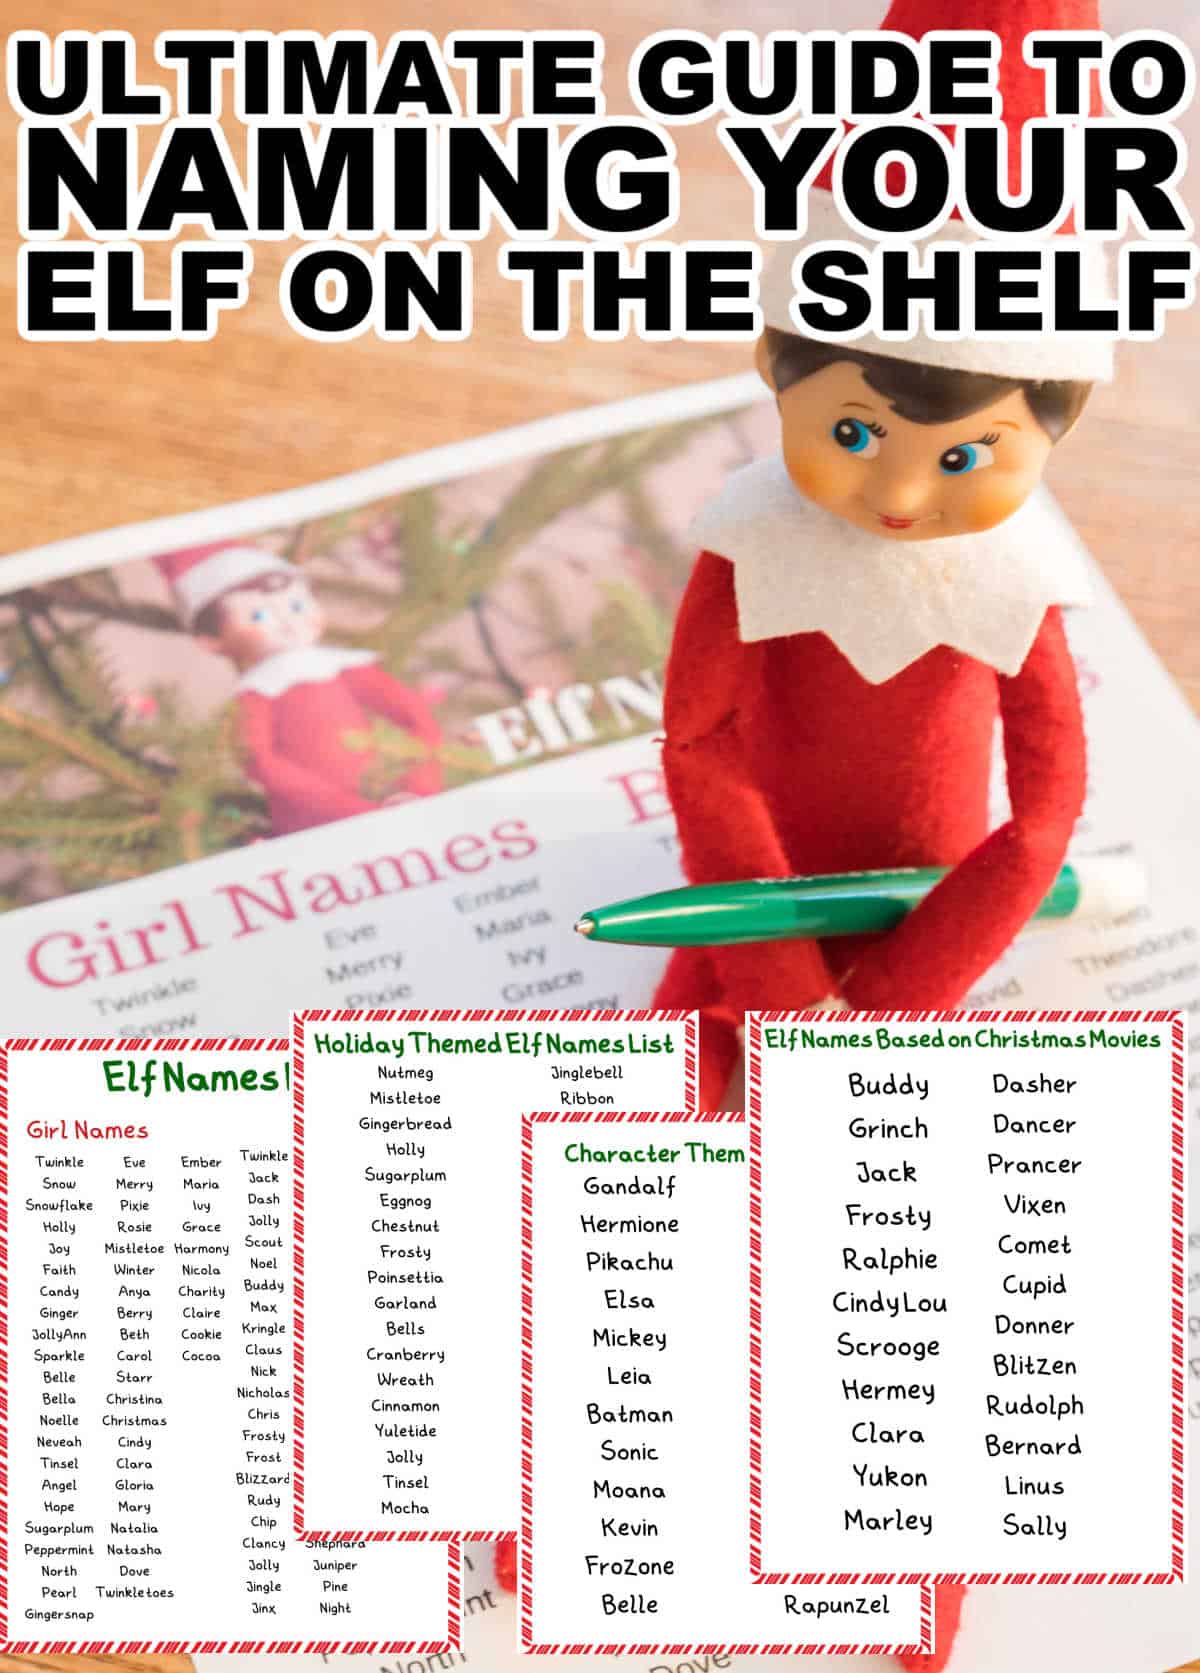 The ultimate guide to naming your elf on the shelf.